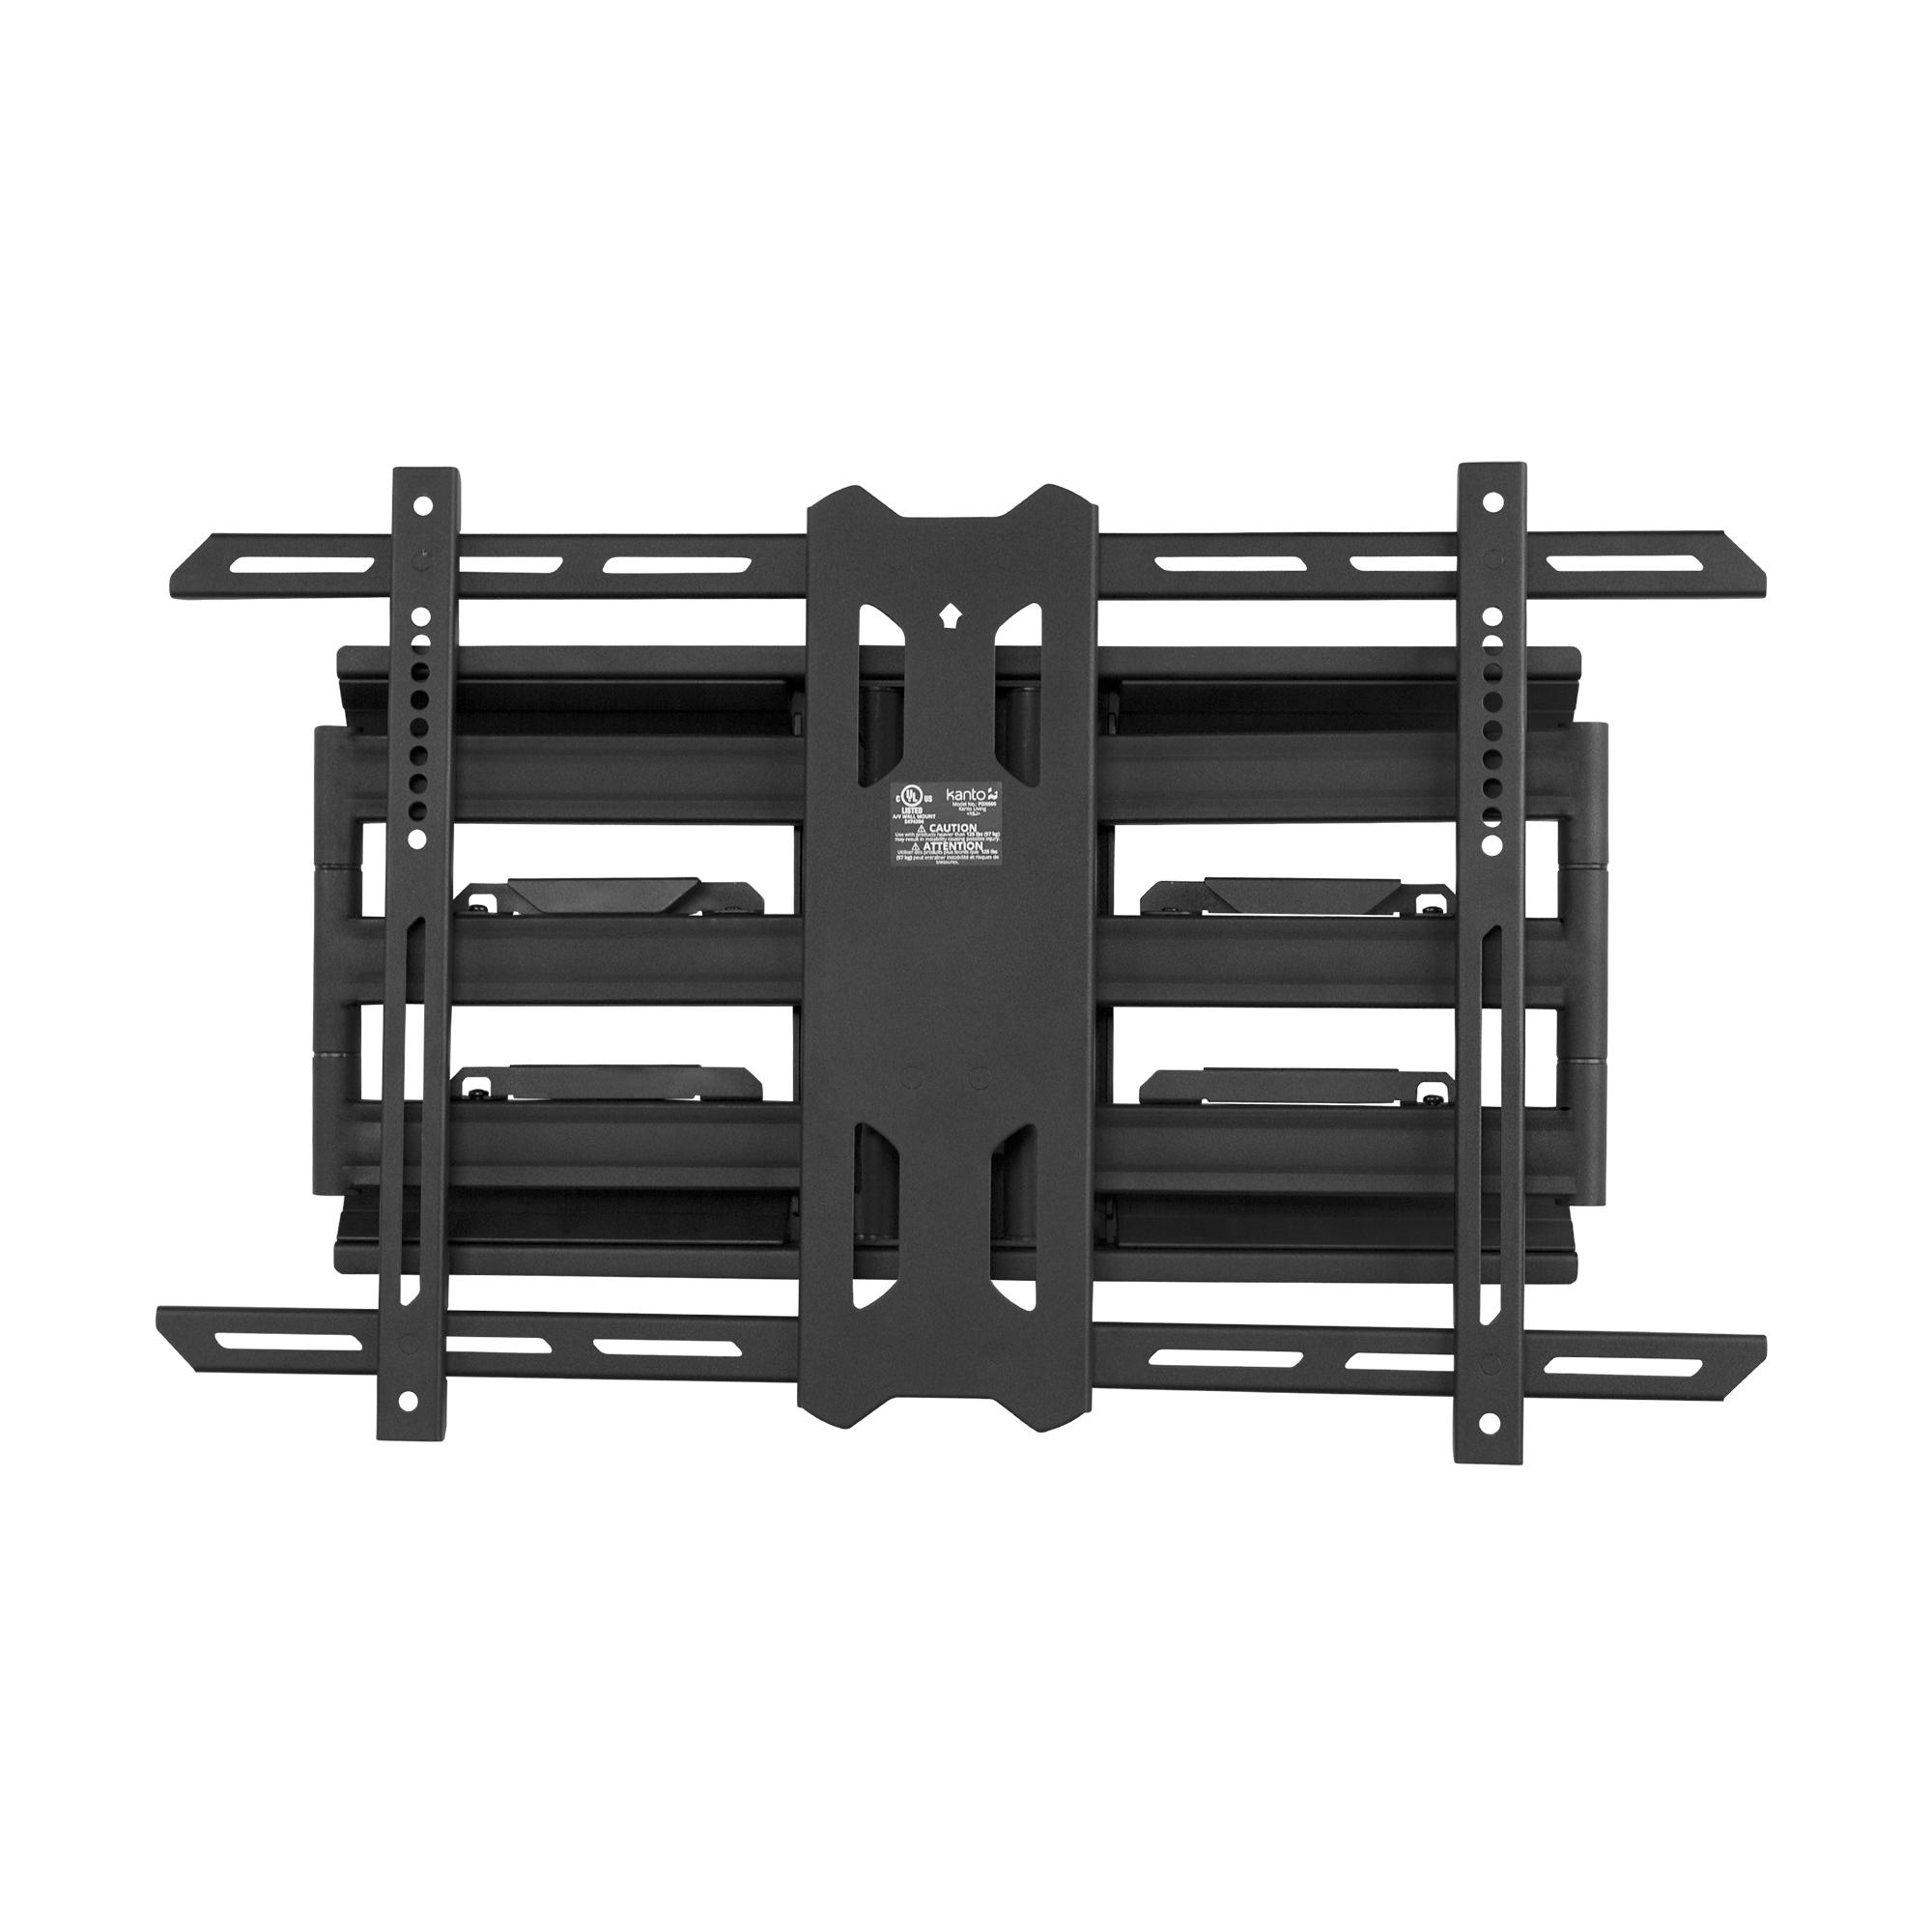 Kanto PDX650 Full Motion Wall Mount for 37-75 inch Displays BLACK - Click Image to Close